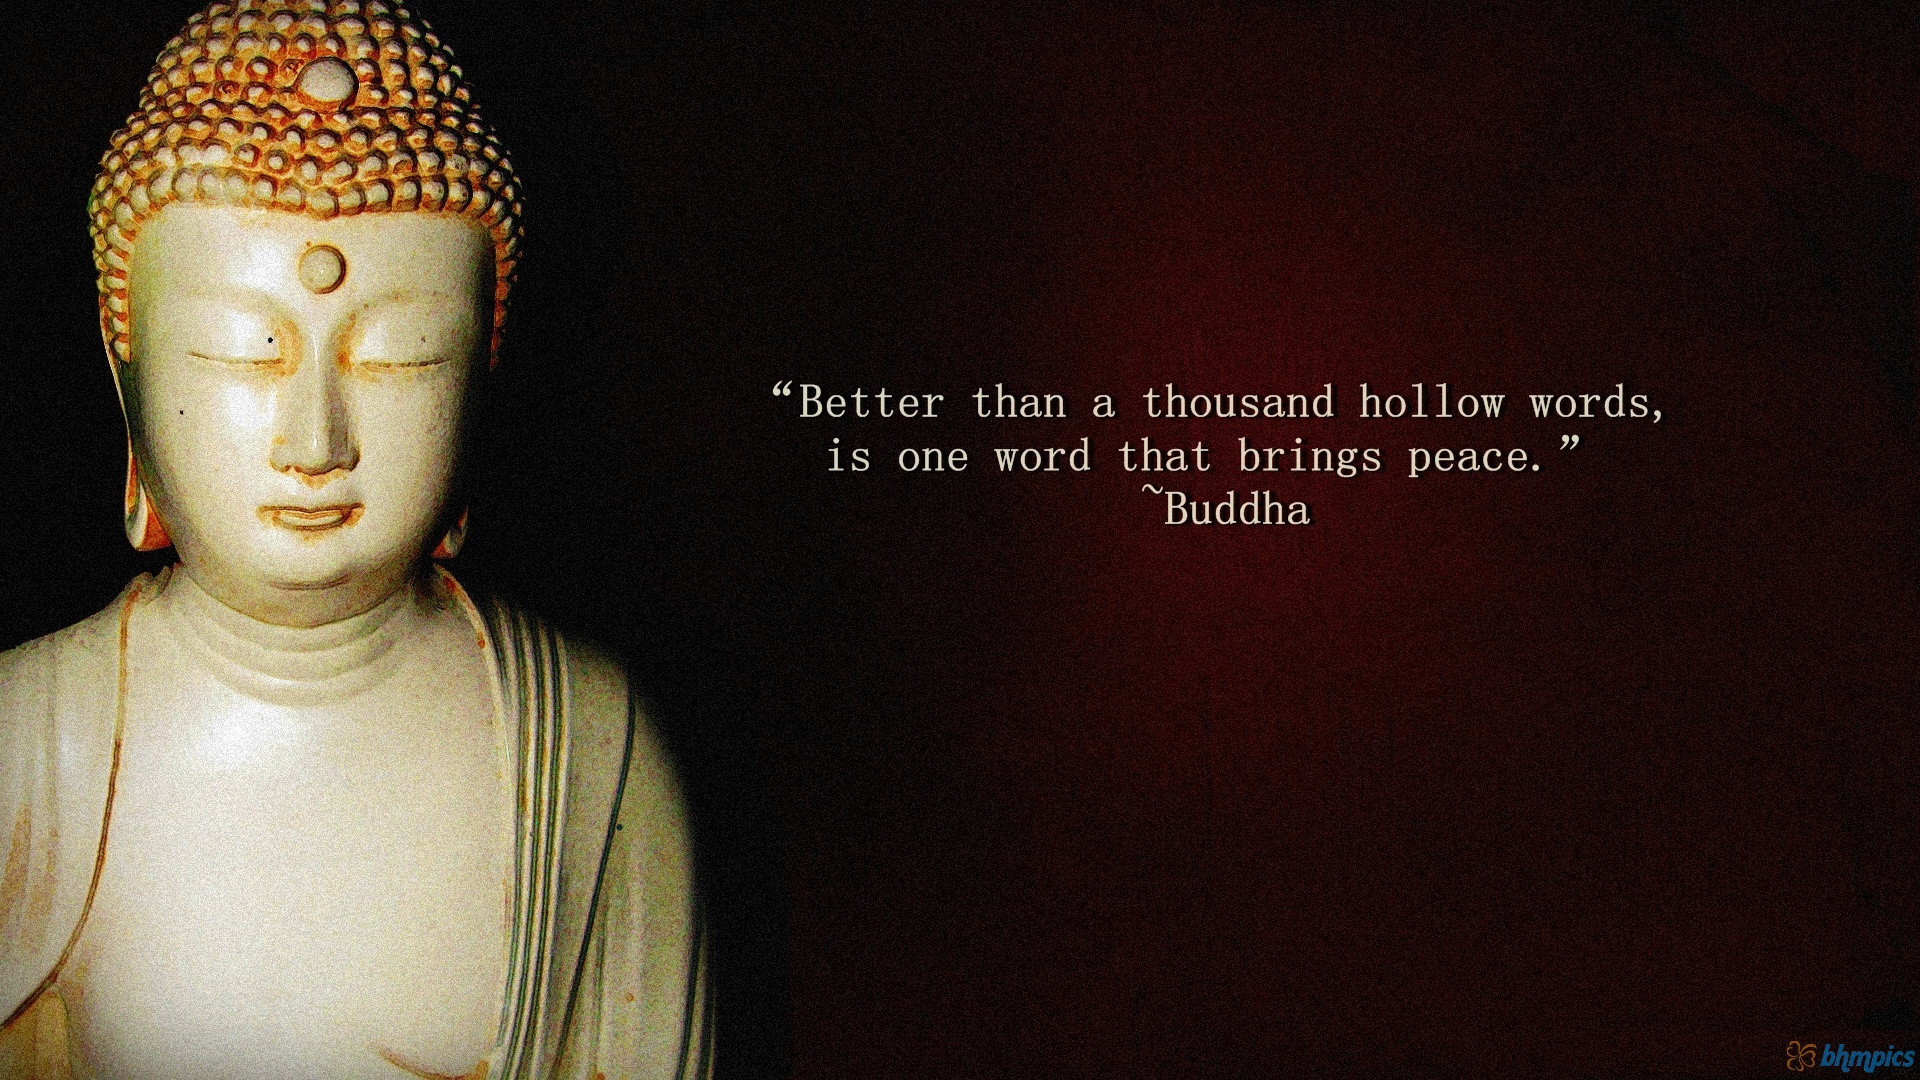 Buddha Motivational Quotes
 WALLPAPER WITH POSITIVE QUOTE BY LORD BUDDHA THOUSAND